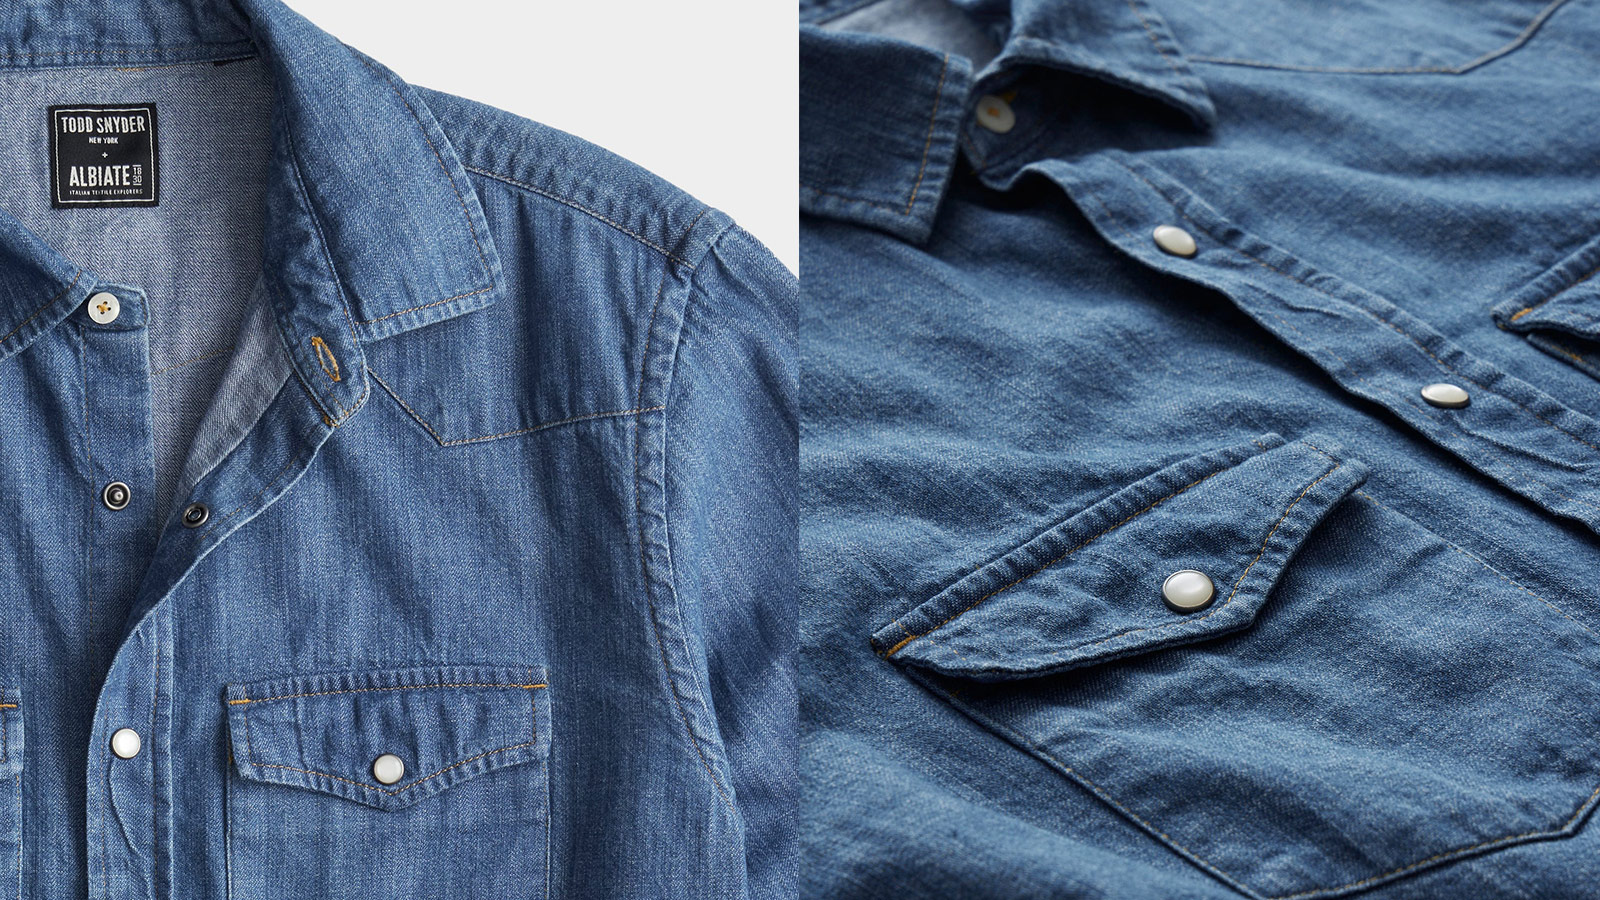 The Todd Snyder Denim Western Shirt Is A Men's Closet Must-Have - IMBOLDN